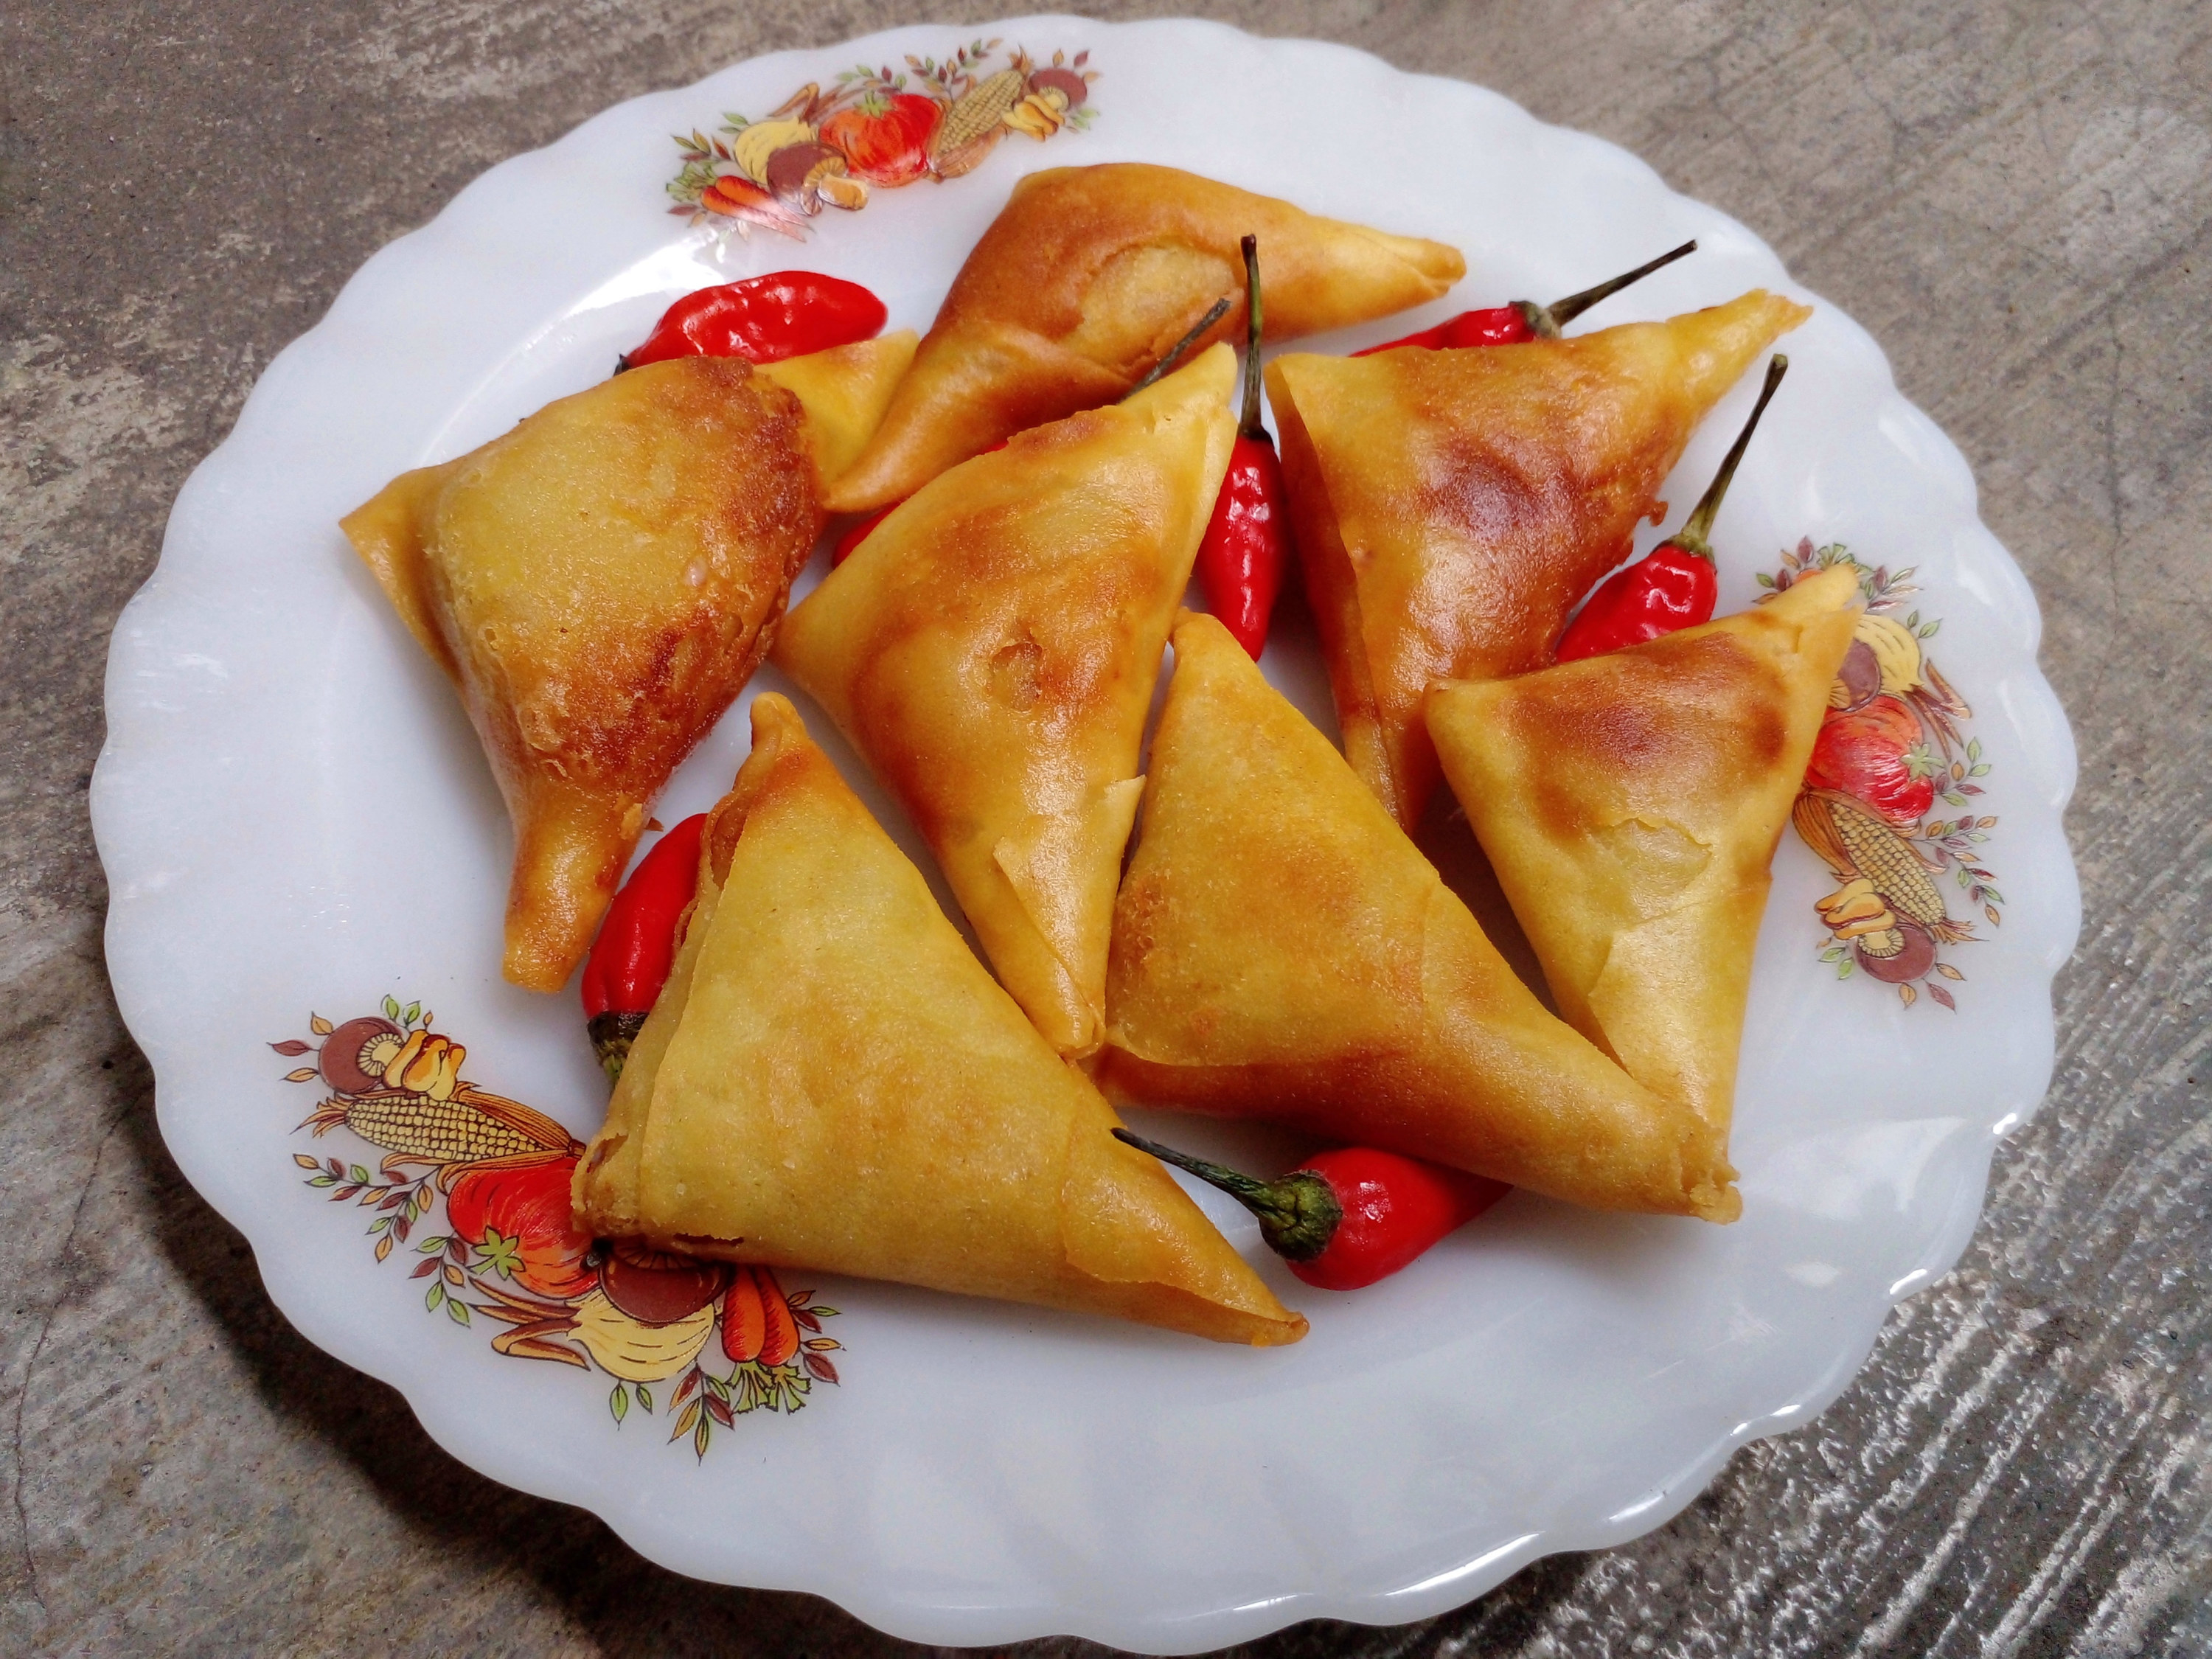 A white plate filled with seven fried samosas and red chilis